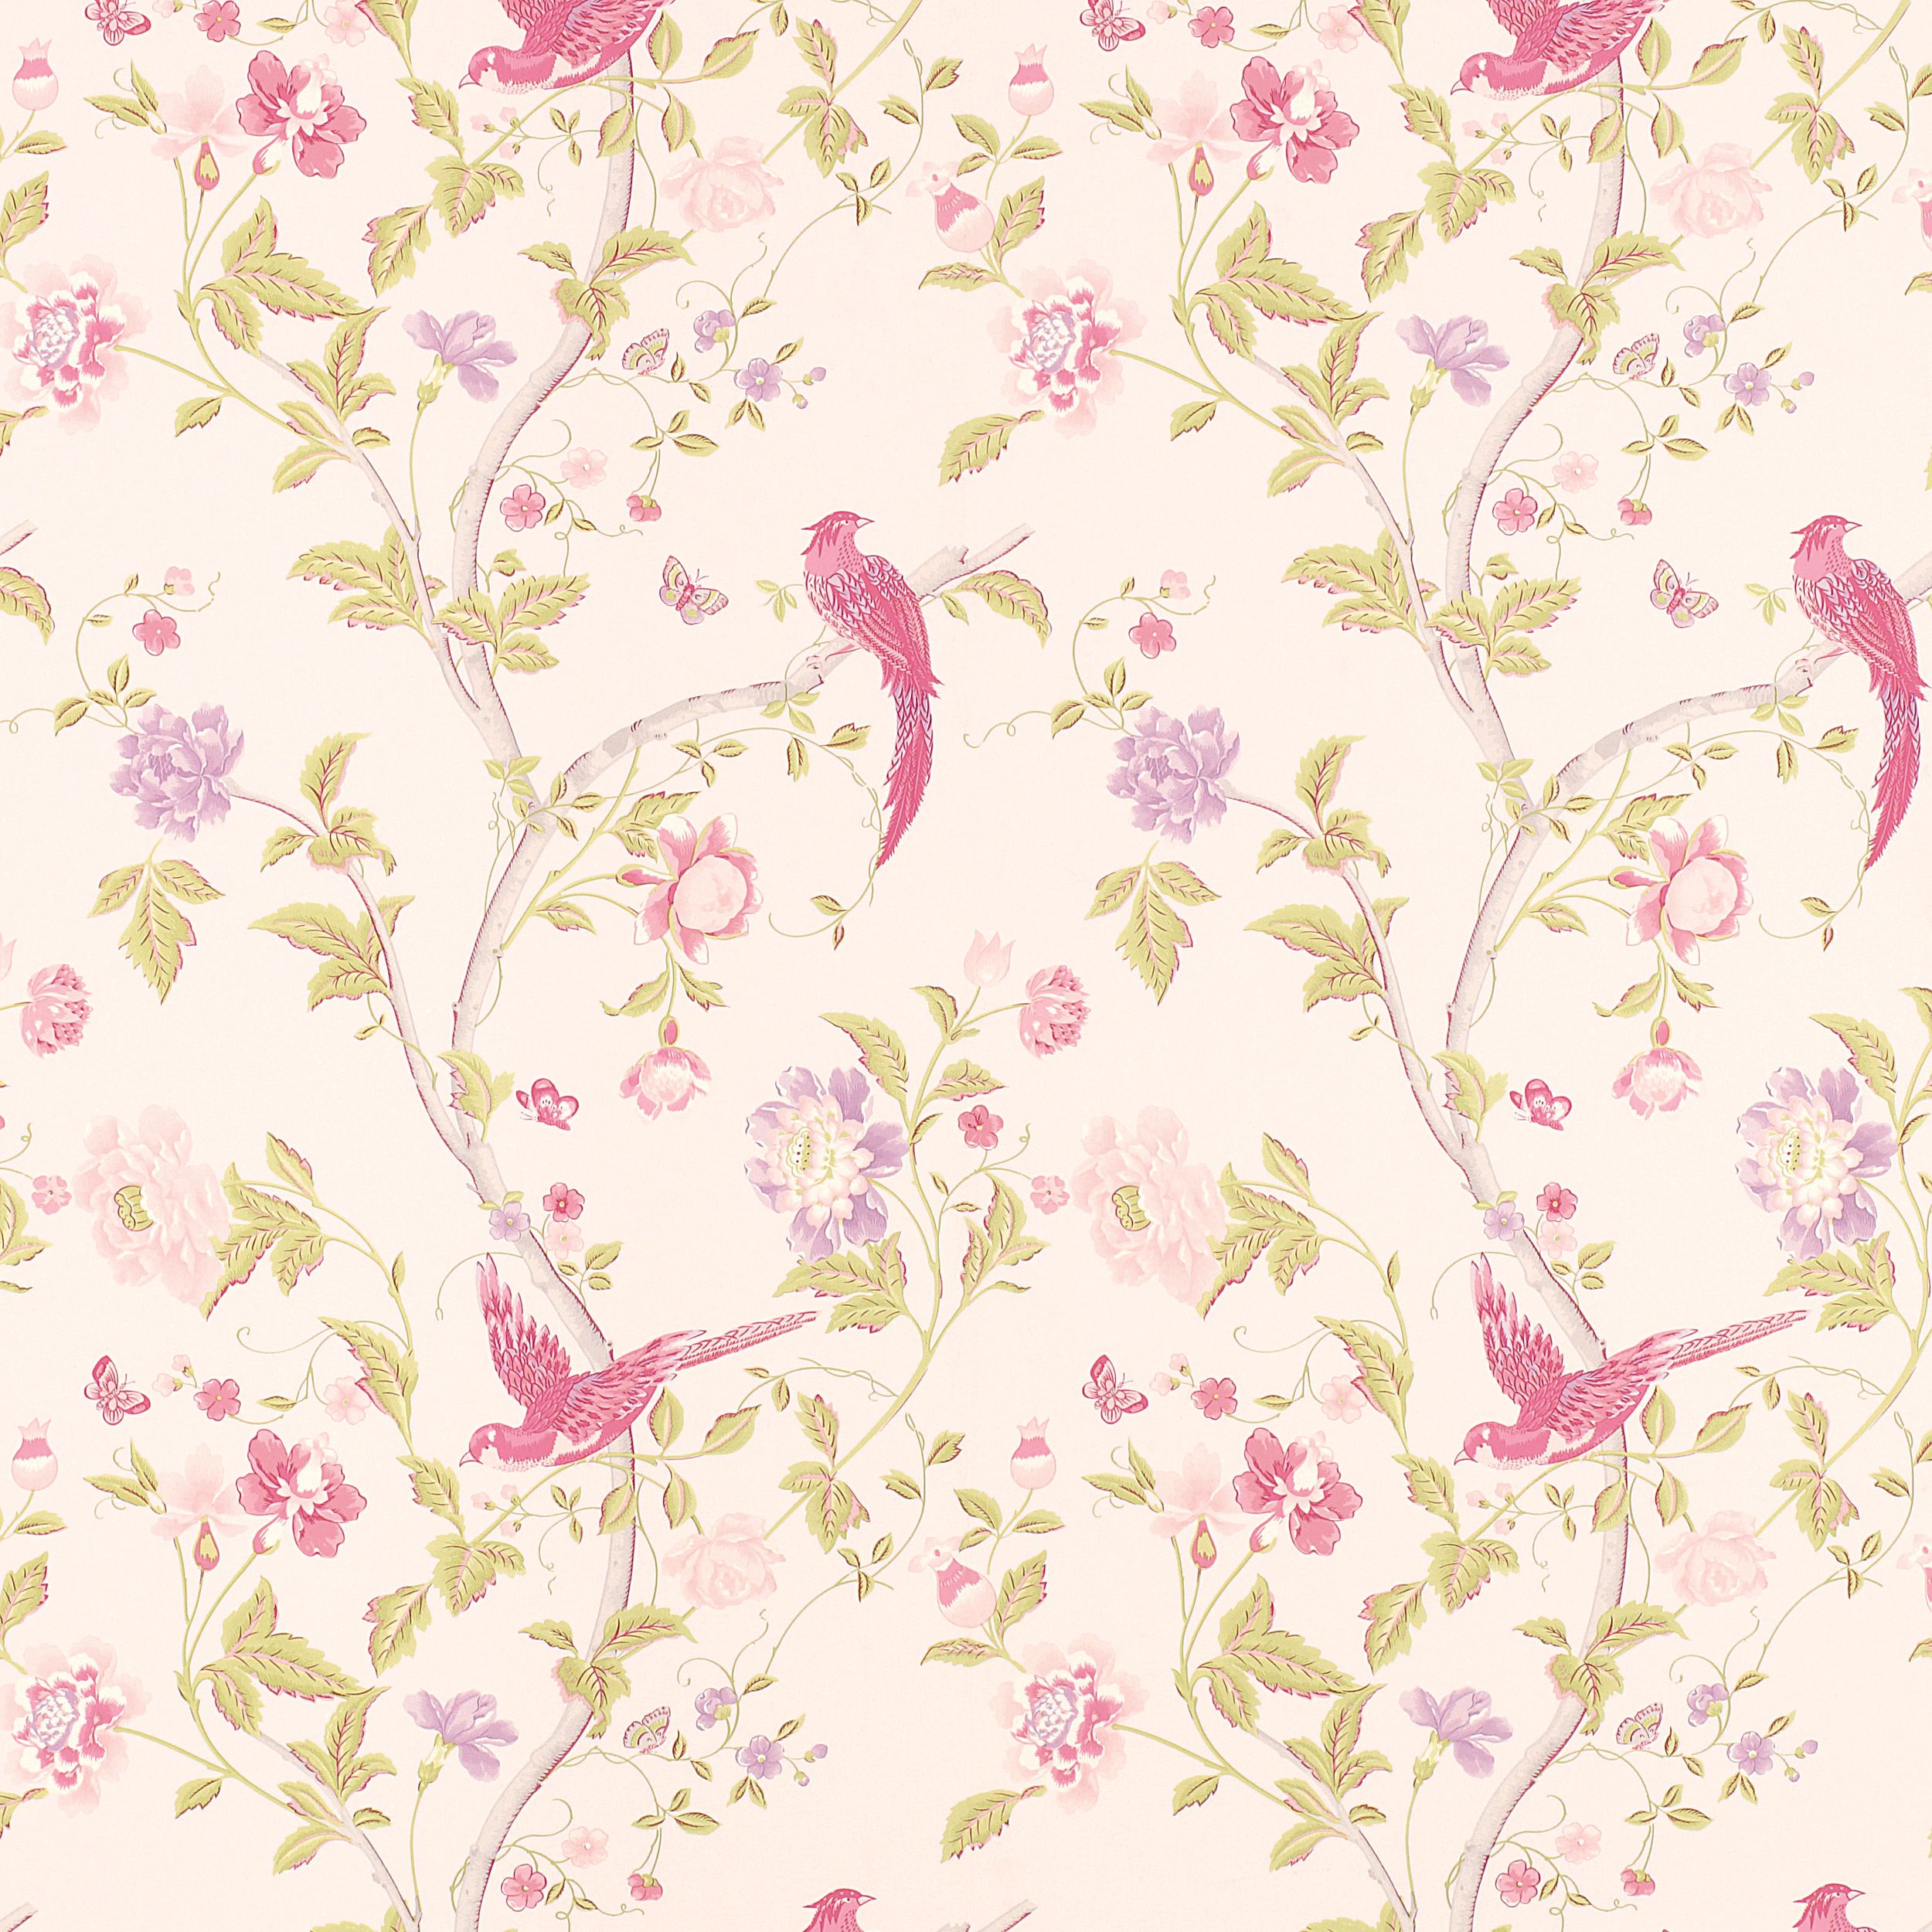 33 Floral Wallpapers, Hd Creative Floral Pics, Full - Laura Ashley Summer Palace Cerise - HD Wallpaper 